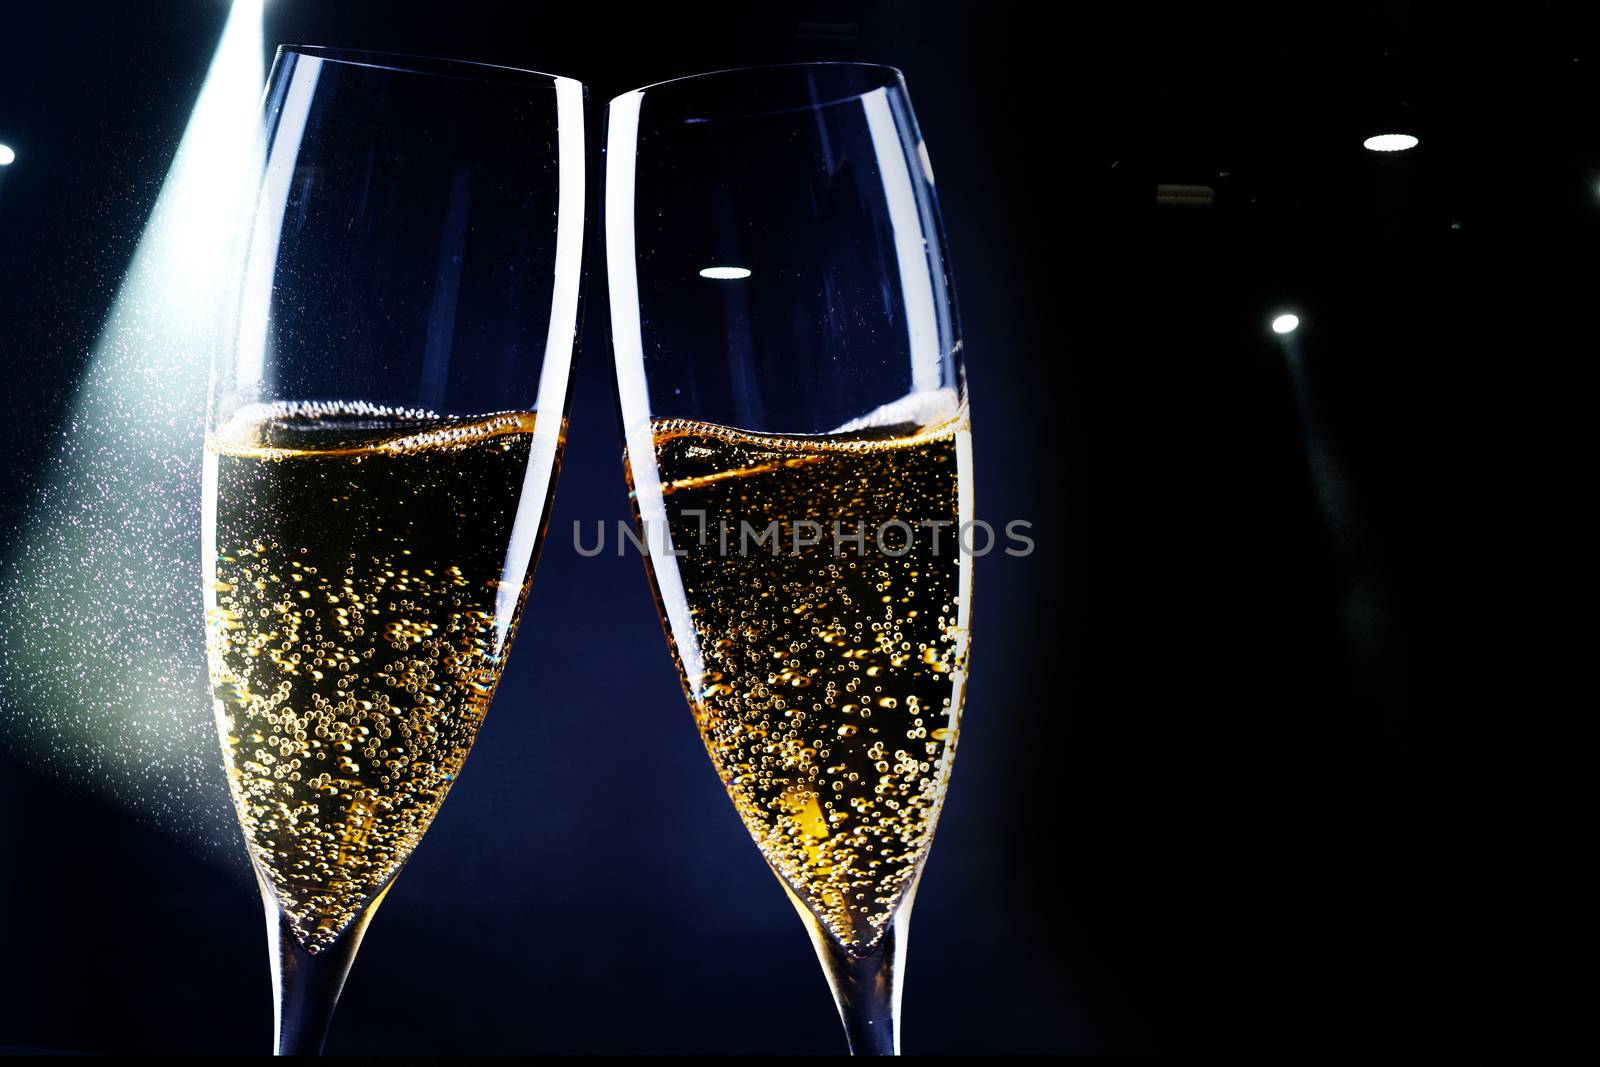 two glasses of champagne in the spotlight - new year celebration by melis